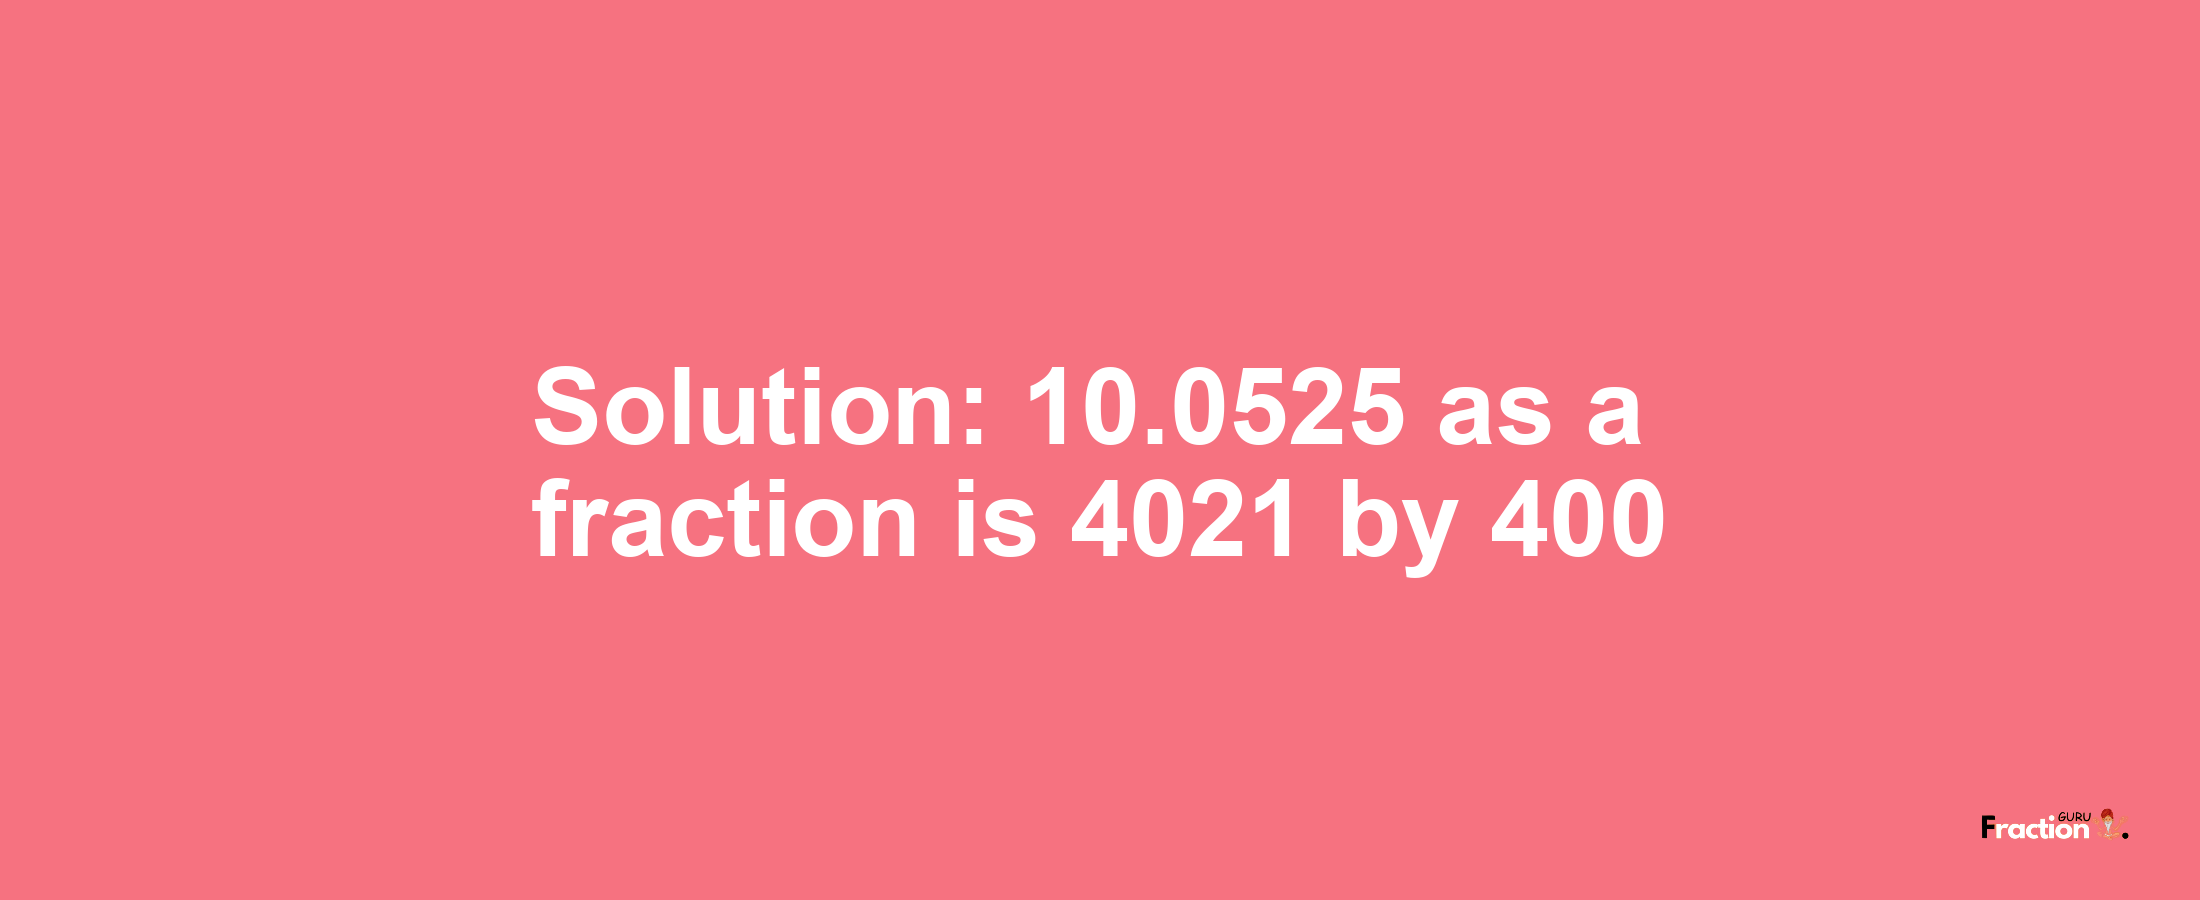 Solution:10.0525 as a fraction is 4021/400